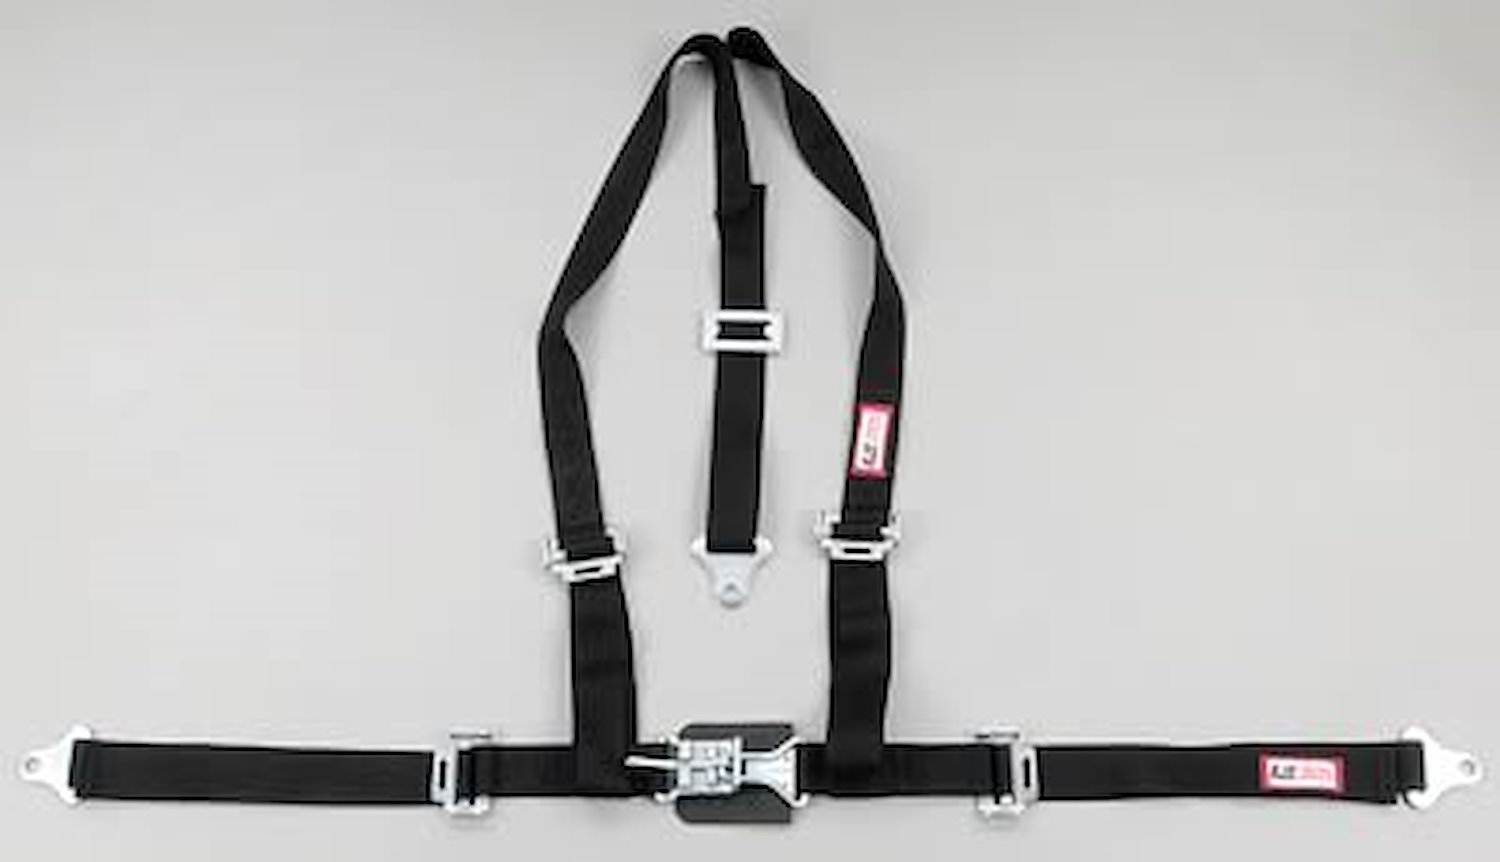 NON-SFI L&L HARNESS 3 PULL DOWN Lap BELT SNAP SEWN IN 2 S.H. Y FLOOR Mount WRAP/SNAP YELLOW